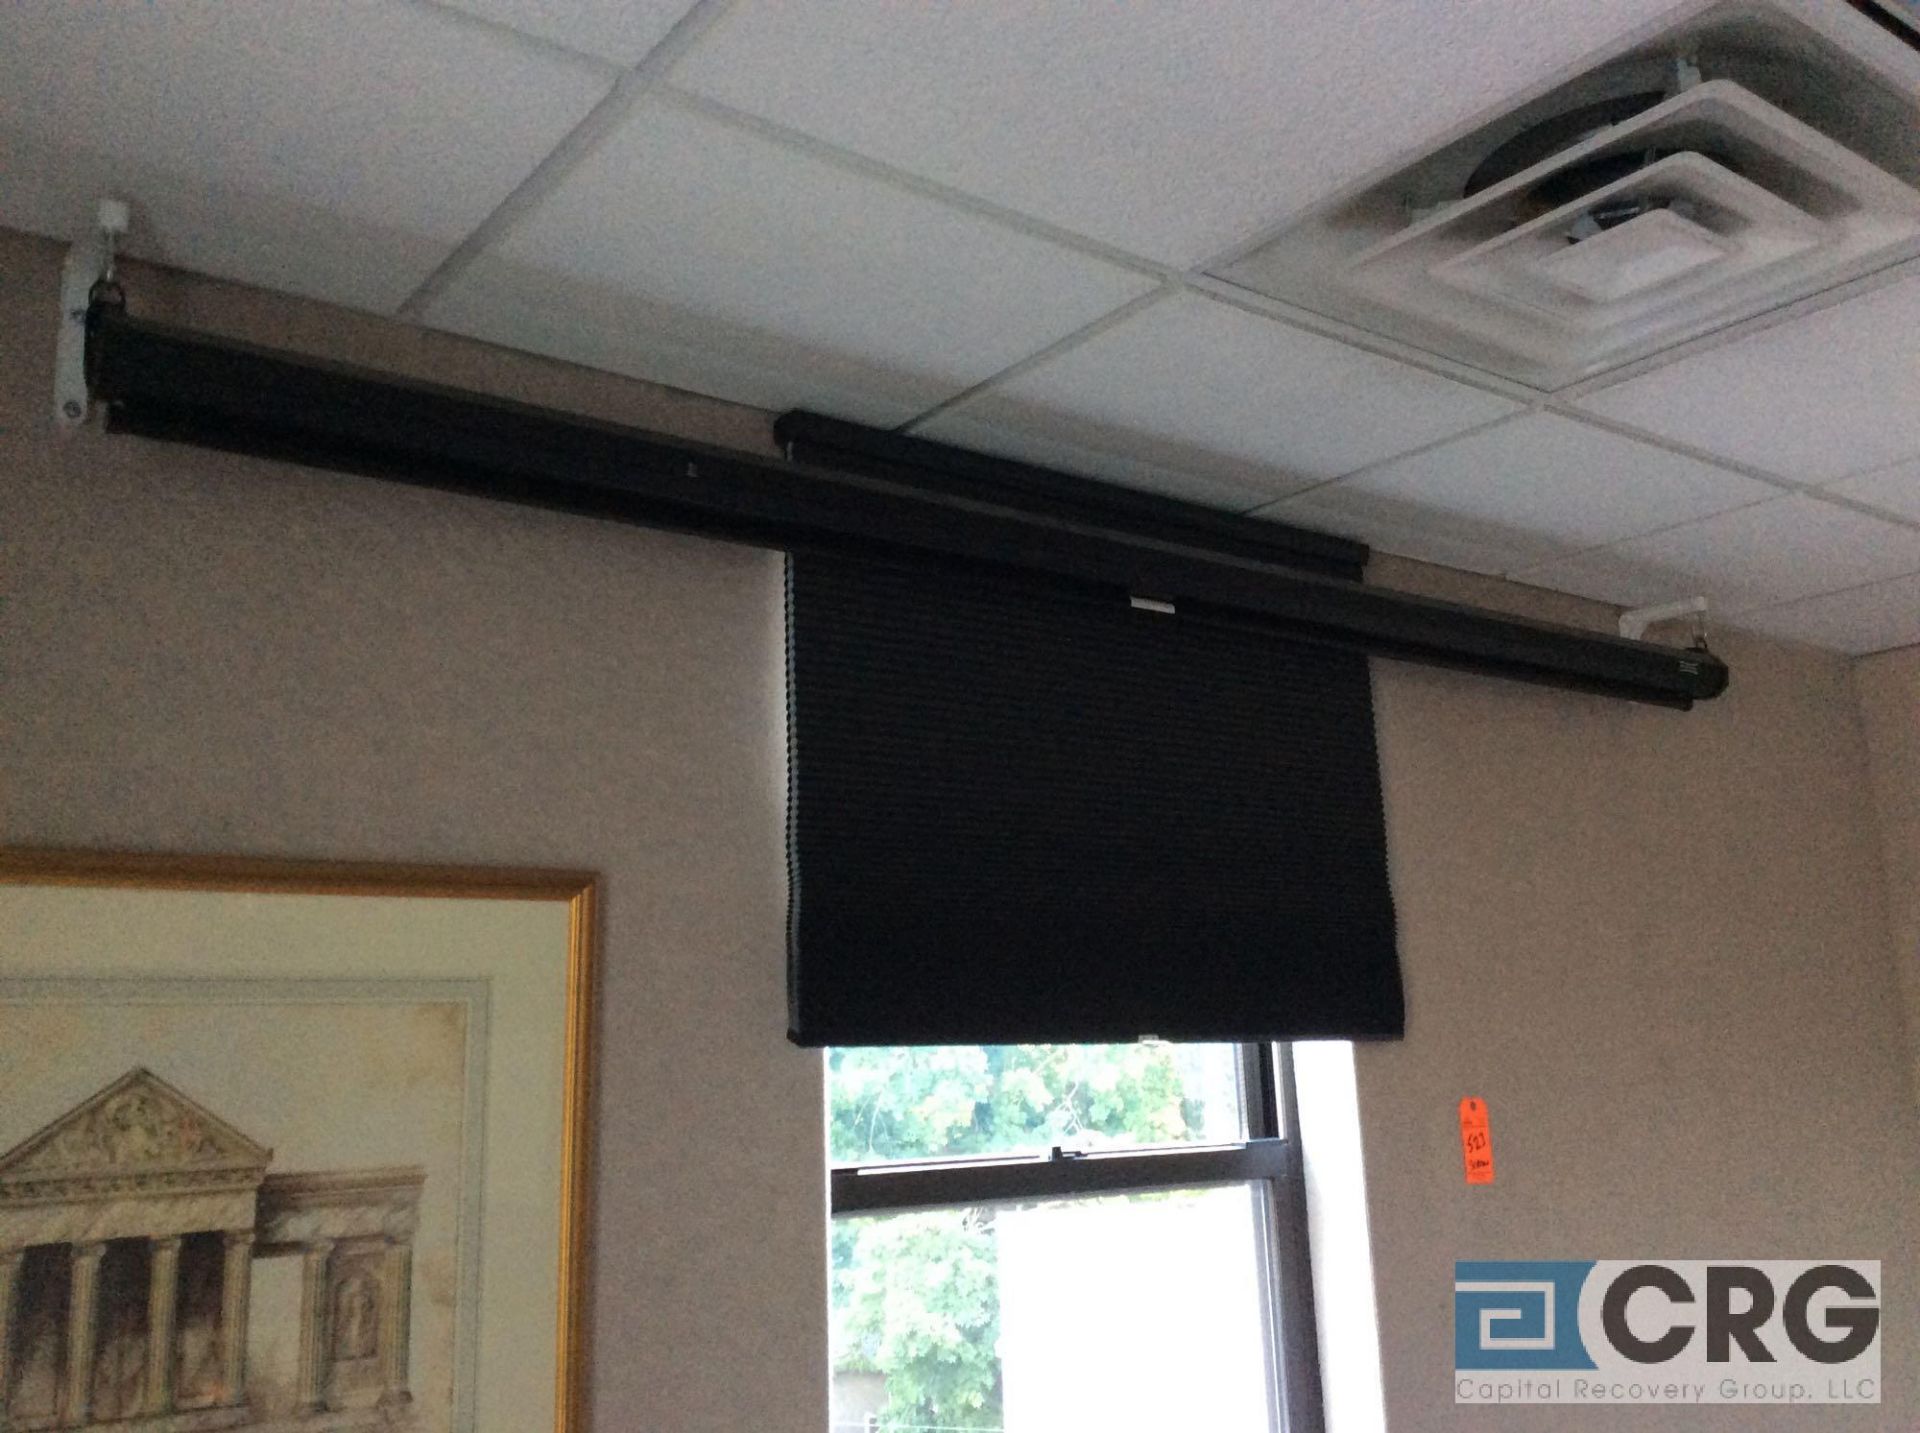 Epson LCD projector with screen - Image 3 of 3